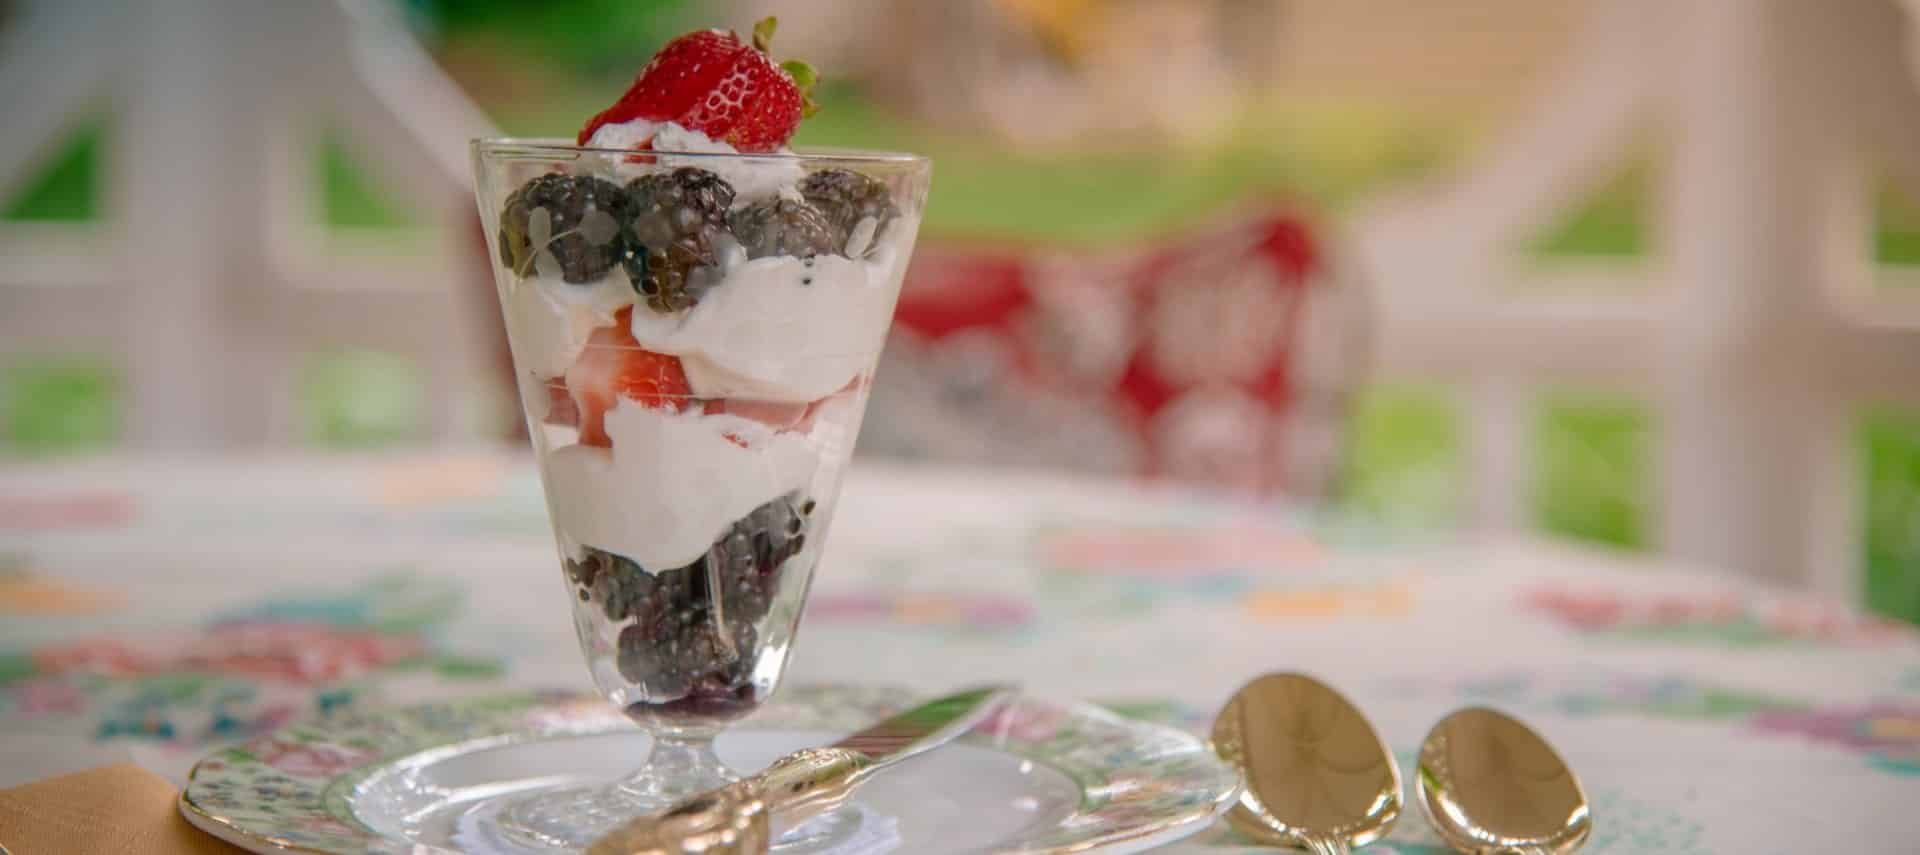 Blackberry, strawberry fruit parfait in glass on top of fine china